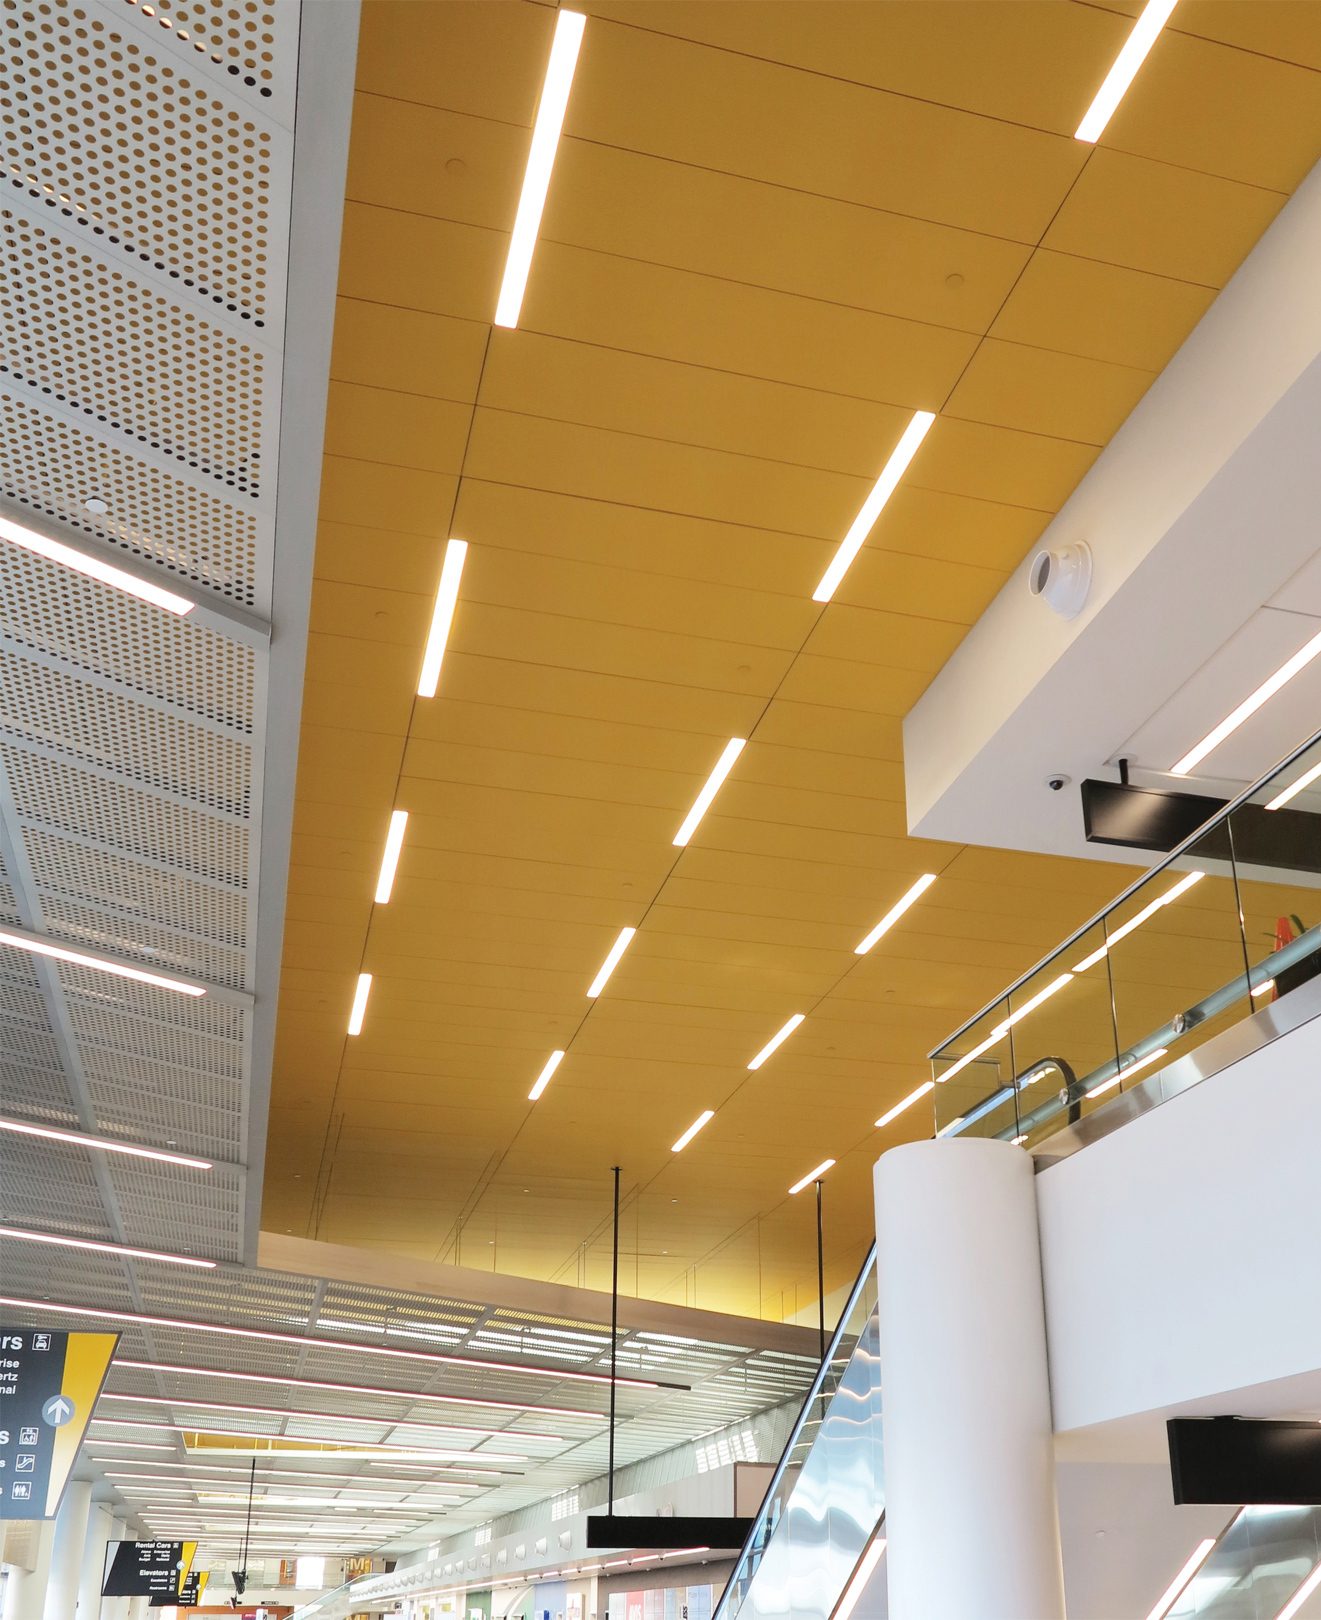 View looking upward at bright yellow airport ceiling system with built in lighting.